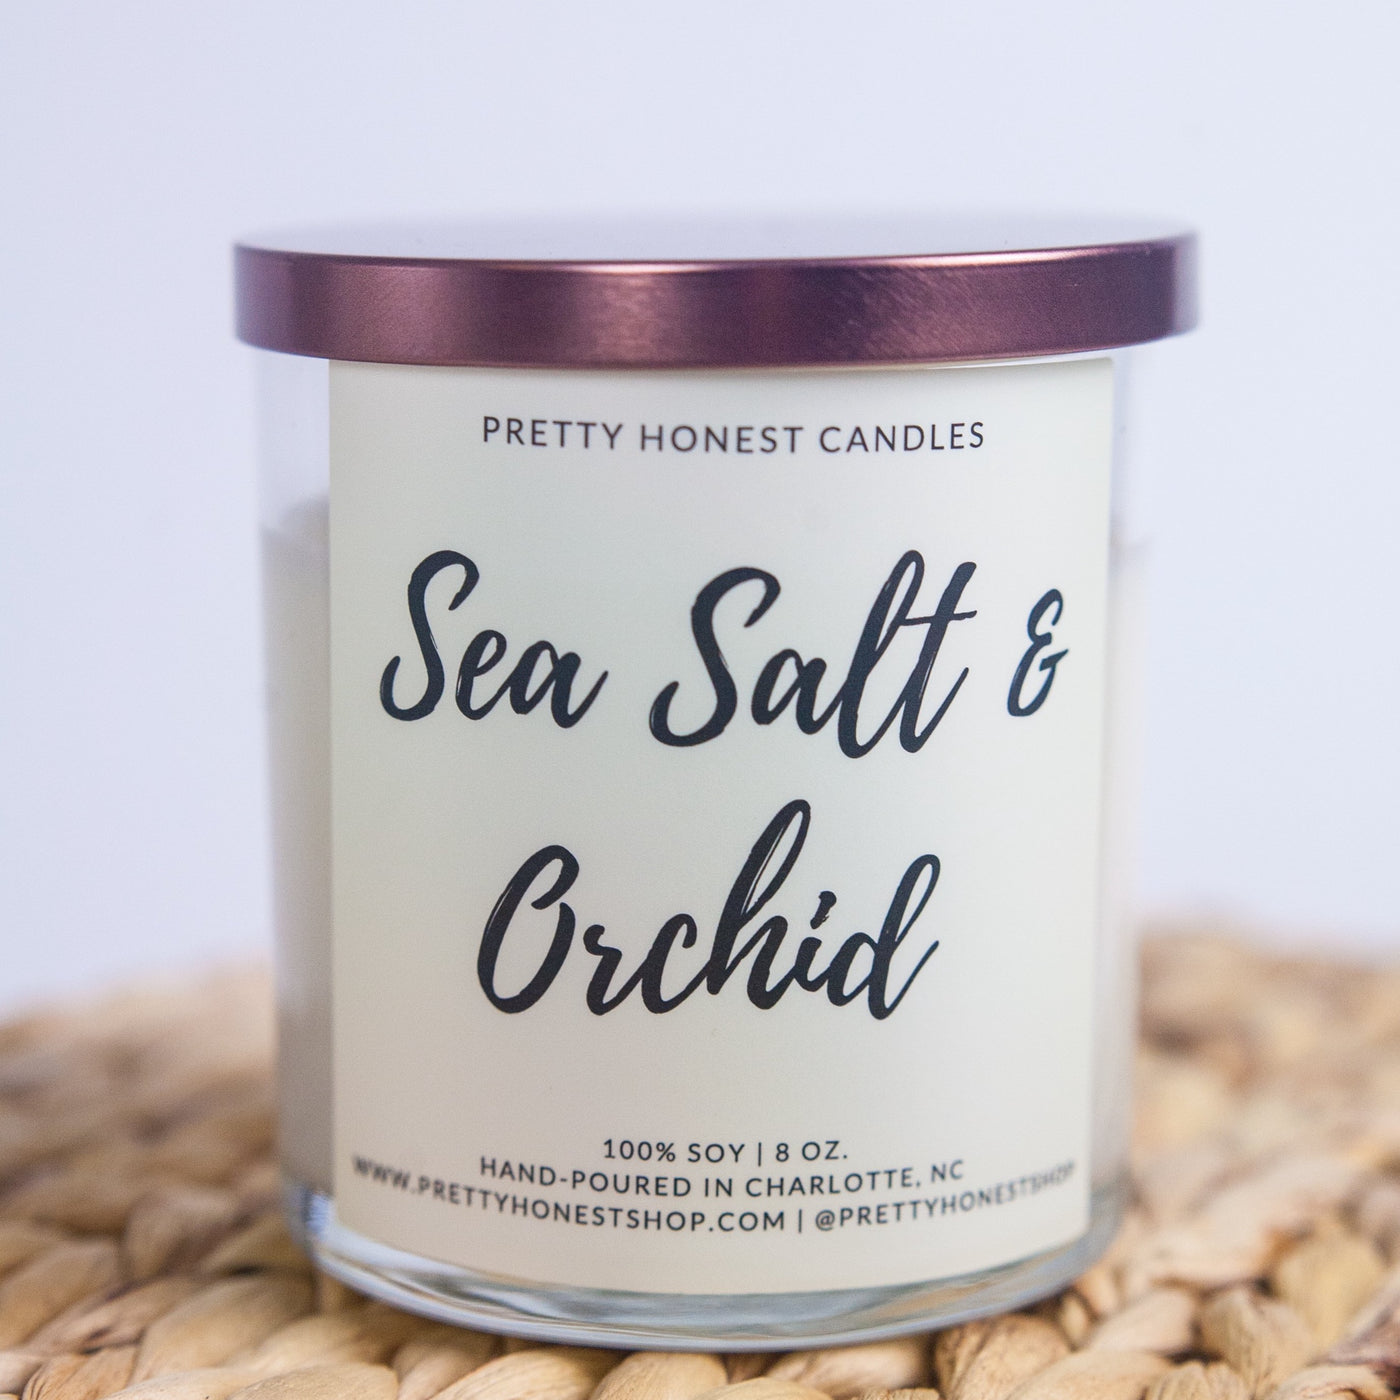 Sea Salt & Orchid Soy Candle - Pretty Honest Candles